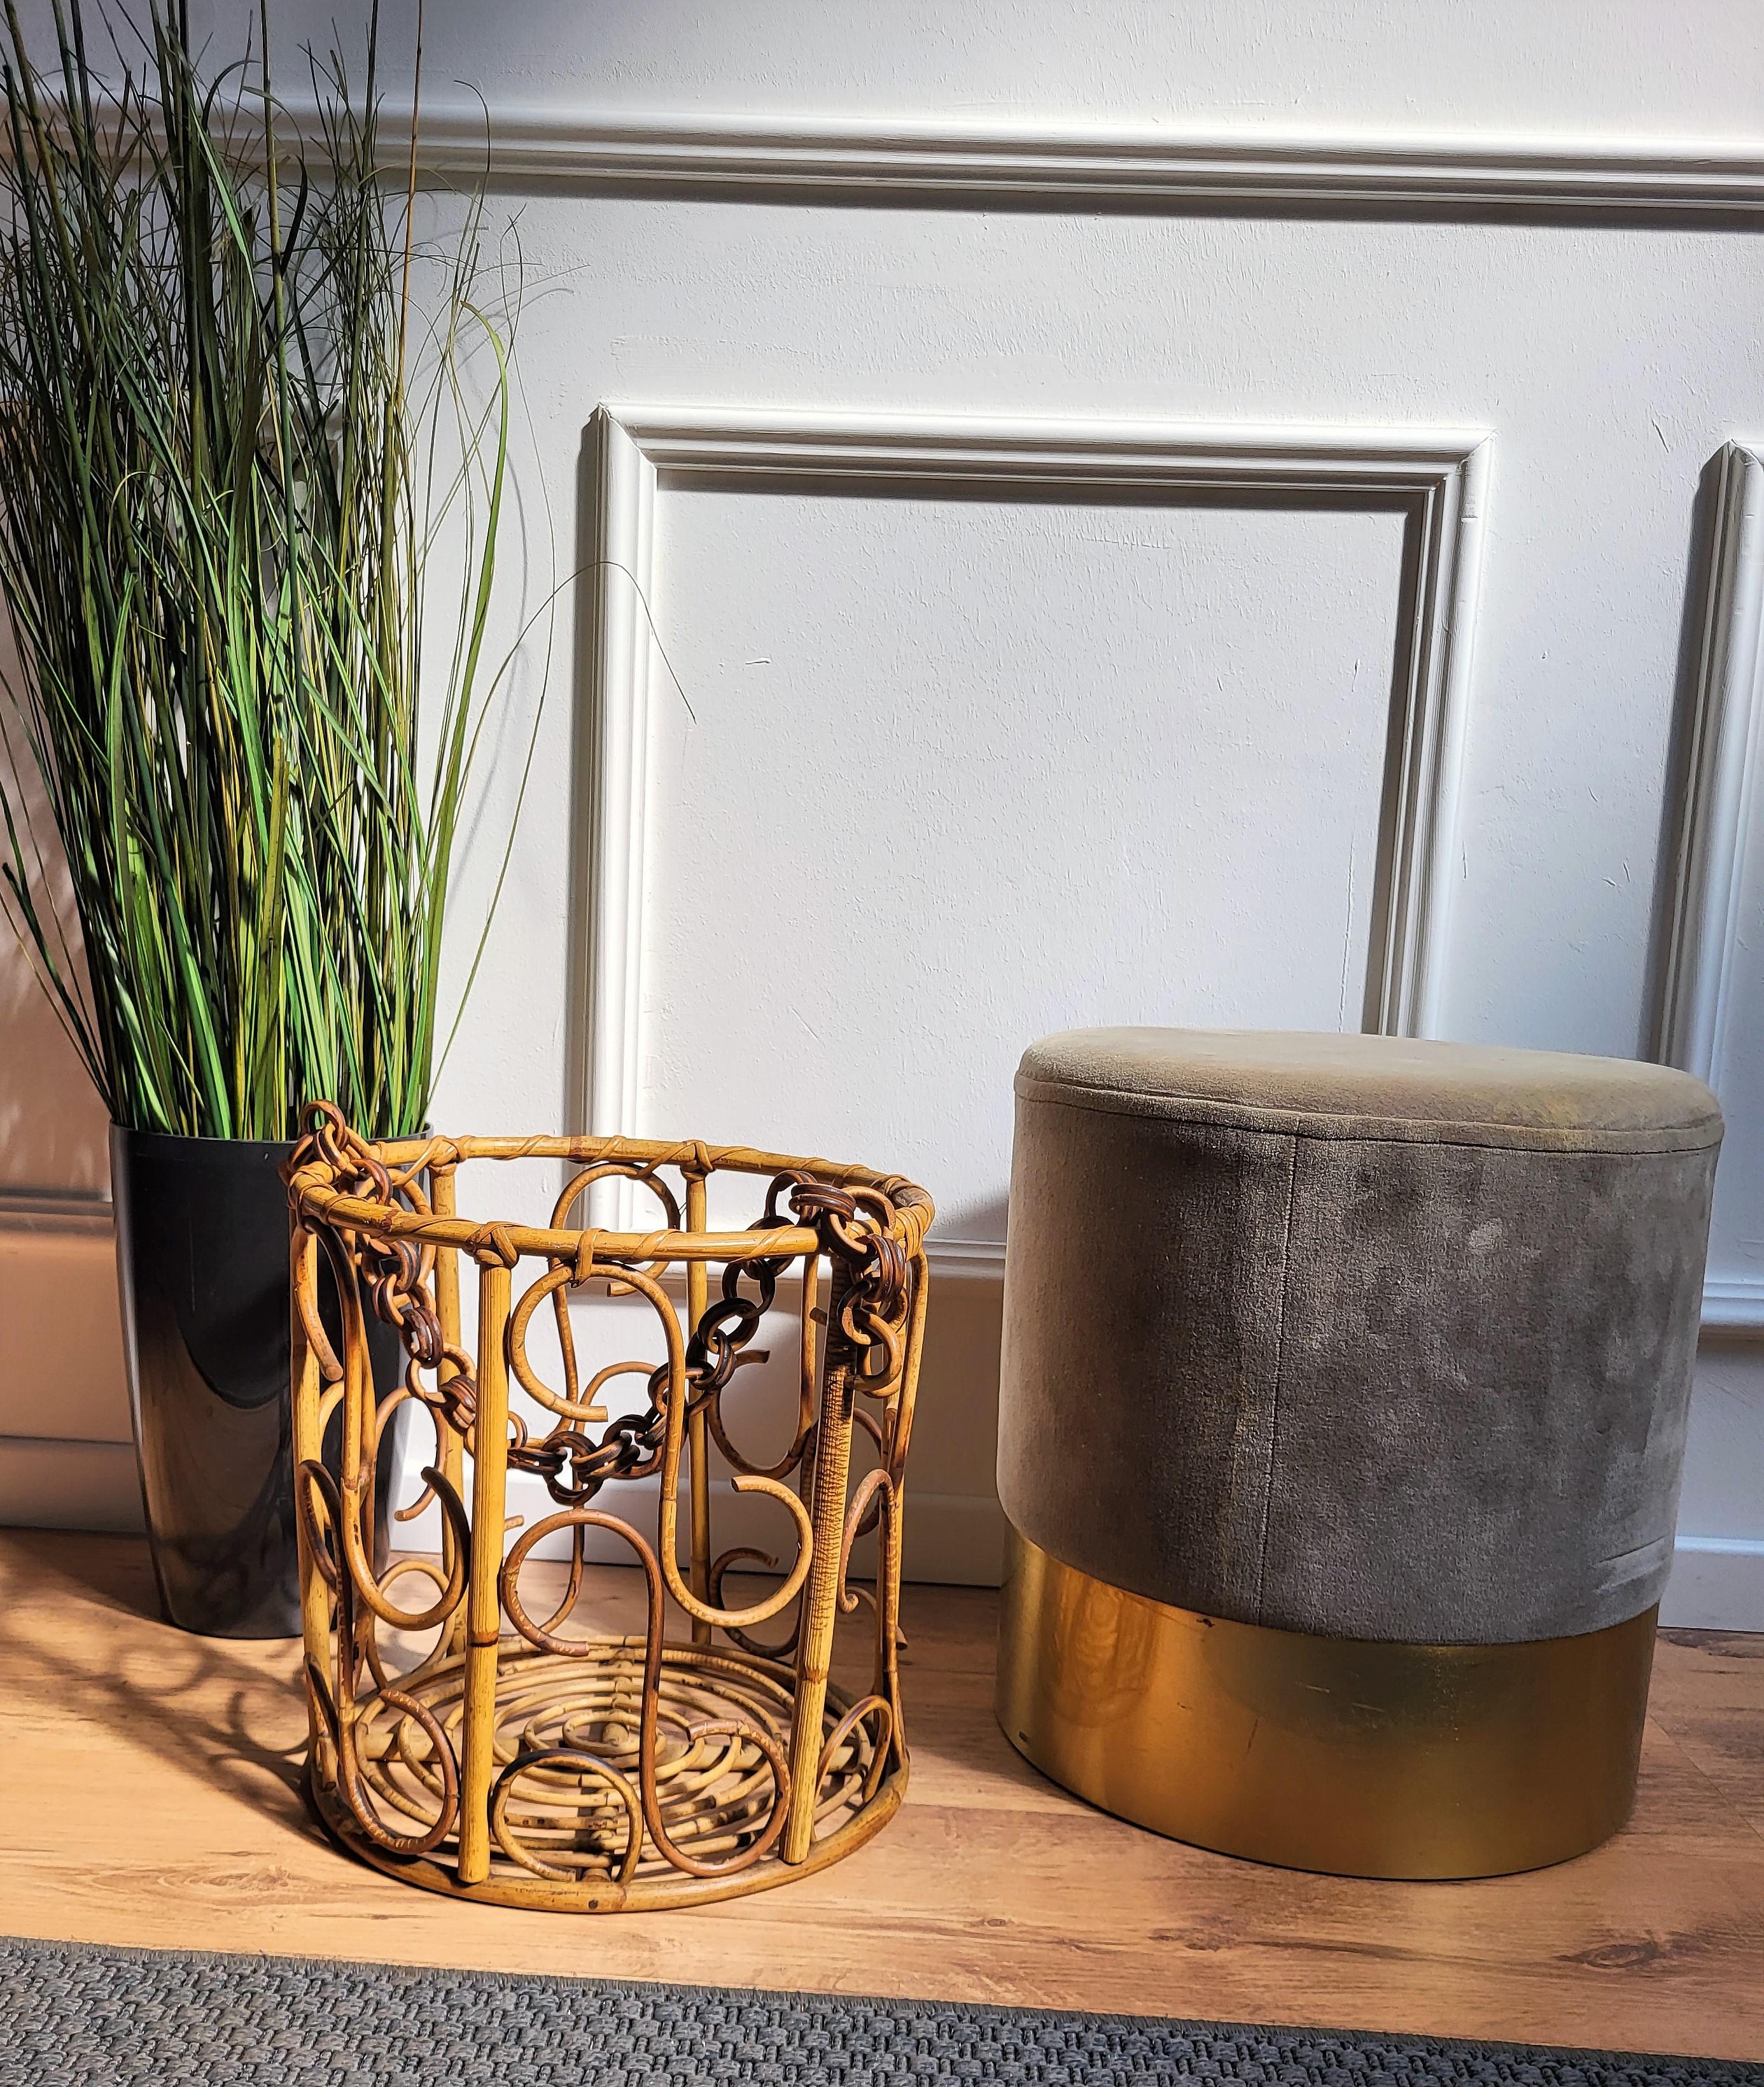 Beautiful 1960s Italian Mid-Century Modern basket or container, perfect in any next to a sofa or in a bedroom as pillow or blanket storage as well as in any bathroom as bathrobe and towels or as a magazine rack stand. This charming piece is in the